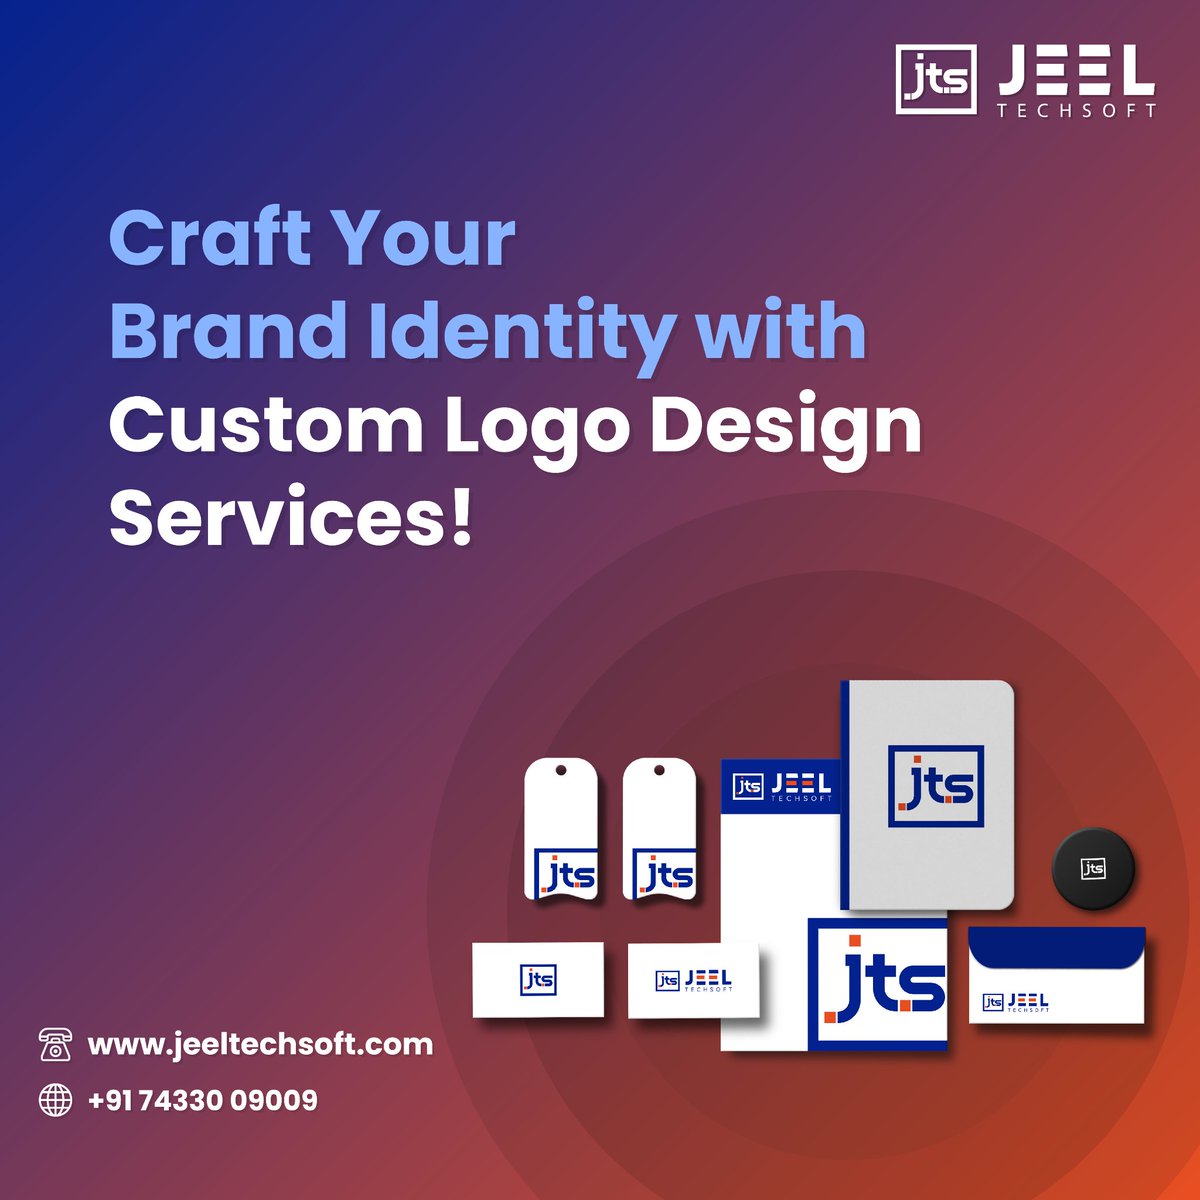 💼Make a lasting impression with a custom logo from Jeel Techsoft! 🌟

🌐Unleash the power of exceptional design for your brand identity

#logodesign #brandidentity #creativedesign #customlogos #businessbranding #visualstorytelling #graphicdesign #corporateidentity #logocreation